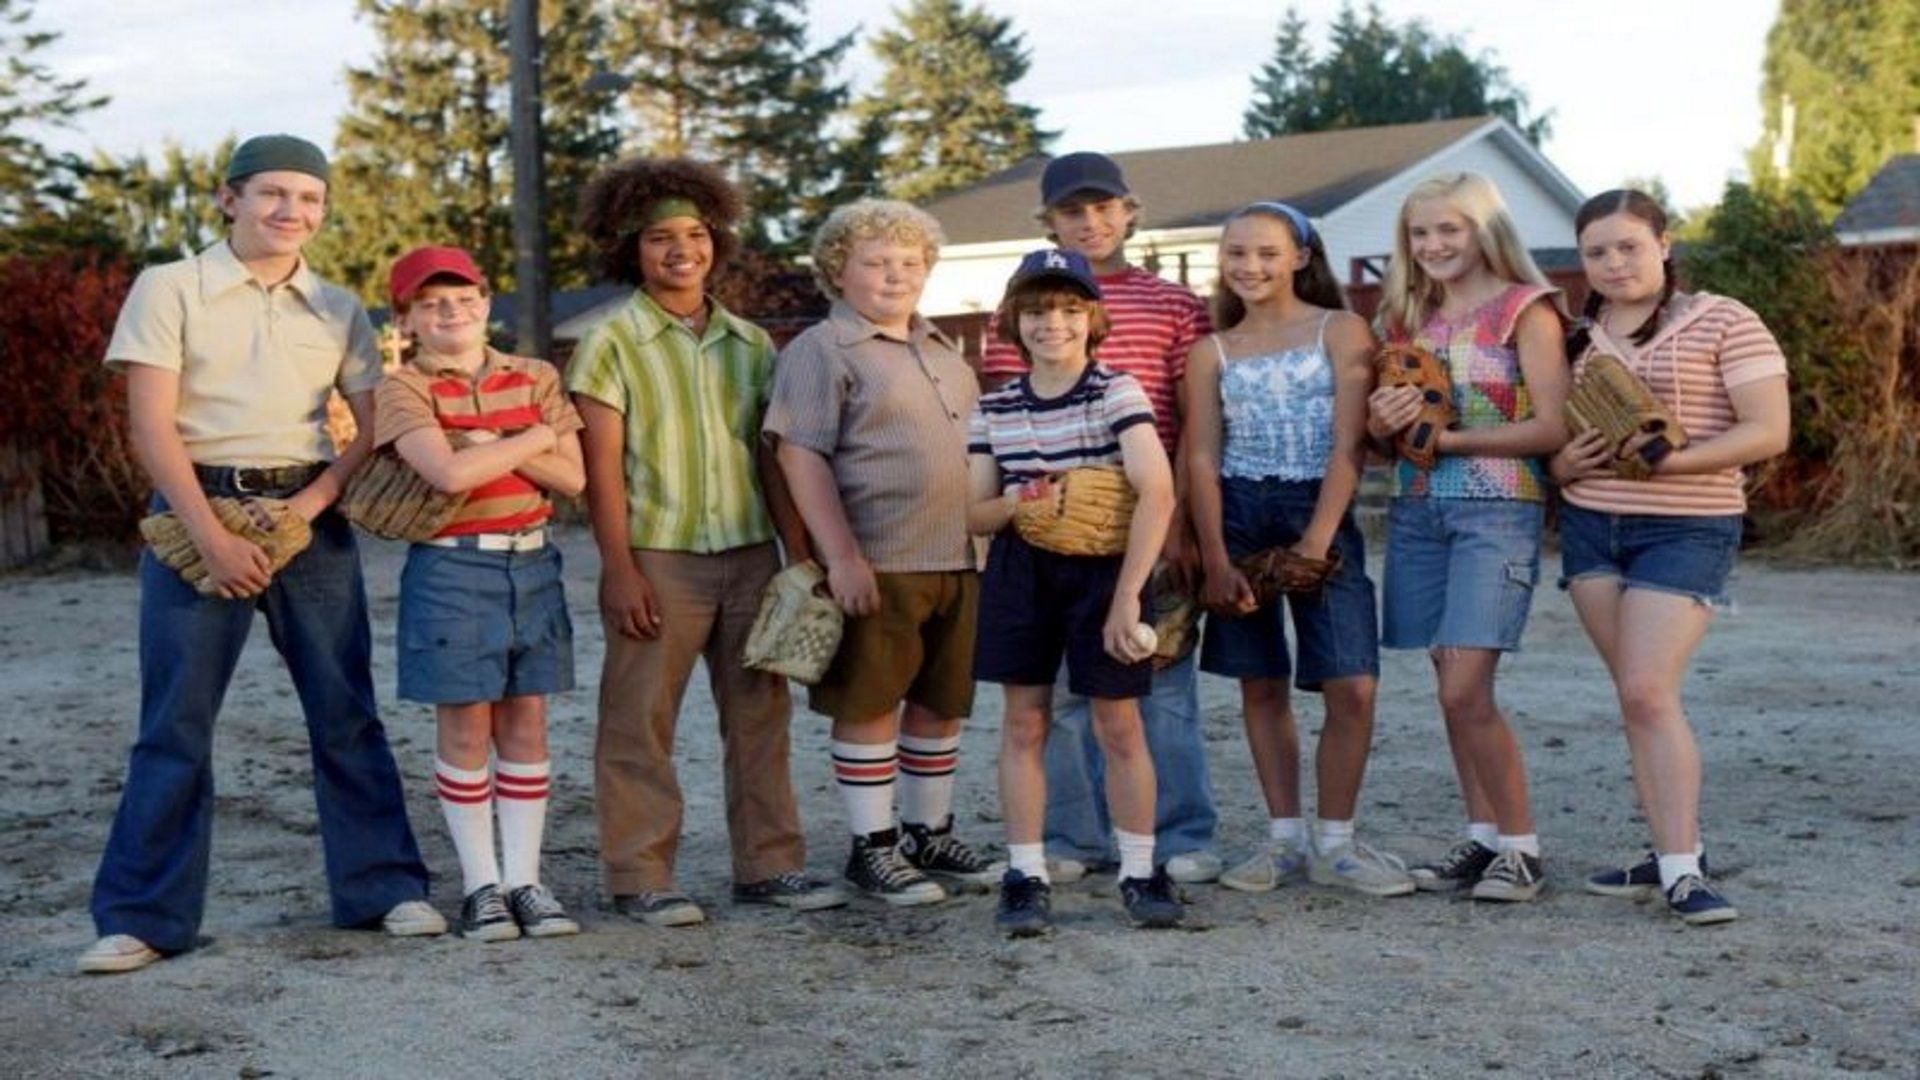 The Sandlot 2 Click and watch here The Sandlot 2 free and without